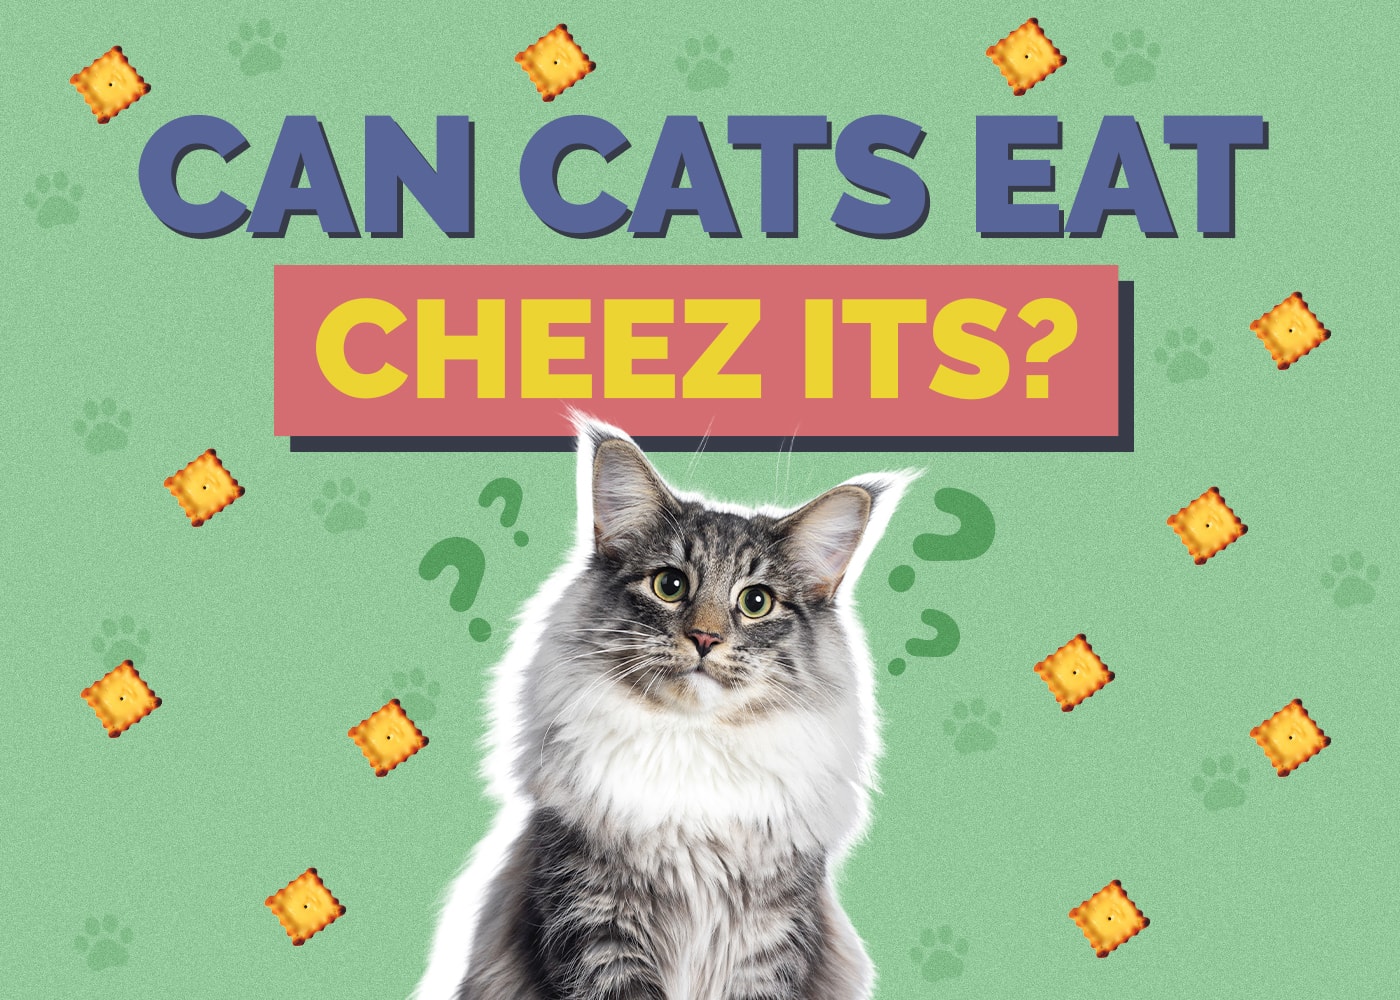 Can Cats Eat cheez-its